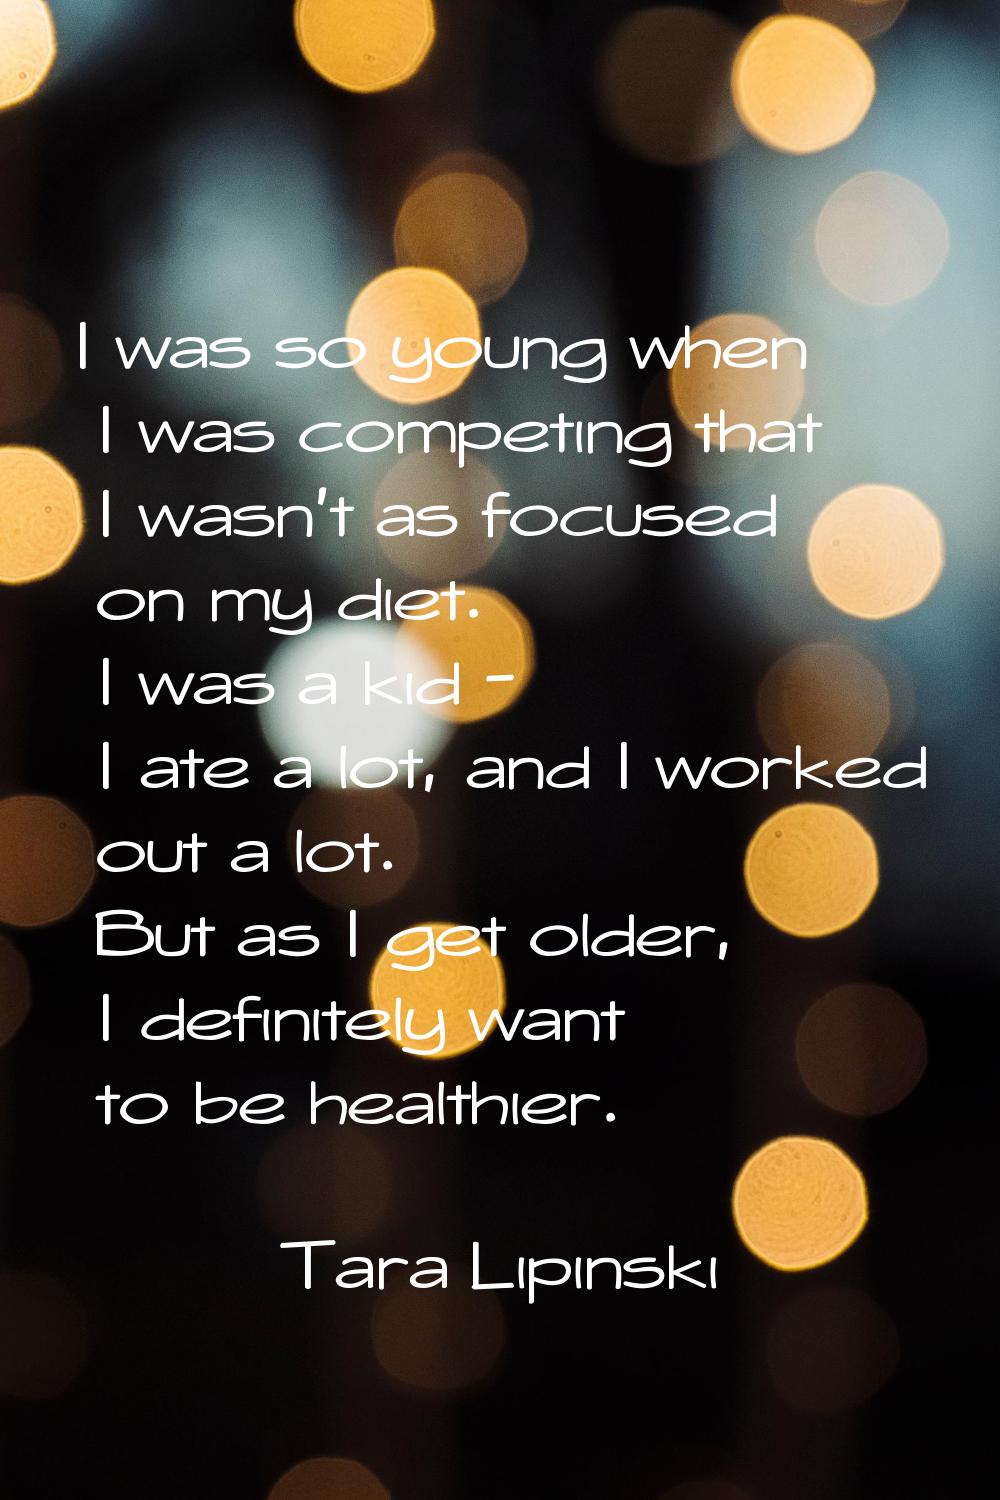 I was so young when I was competing that I wasn't as focused on my diet. I was a kid - I ate a lot,